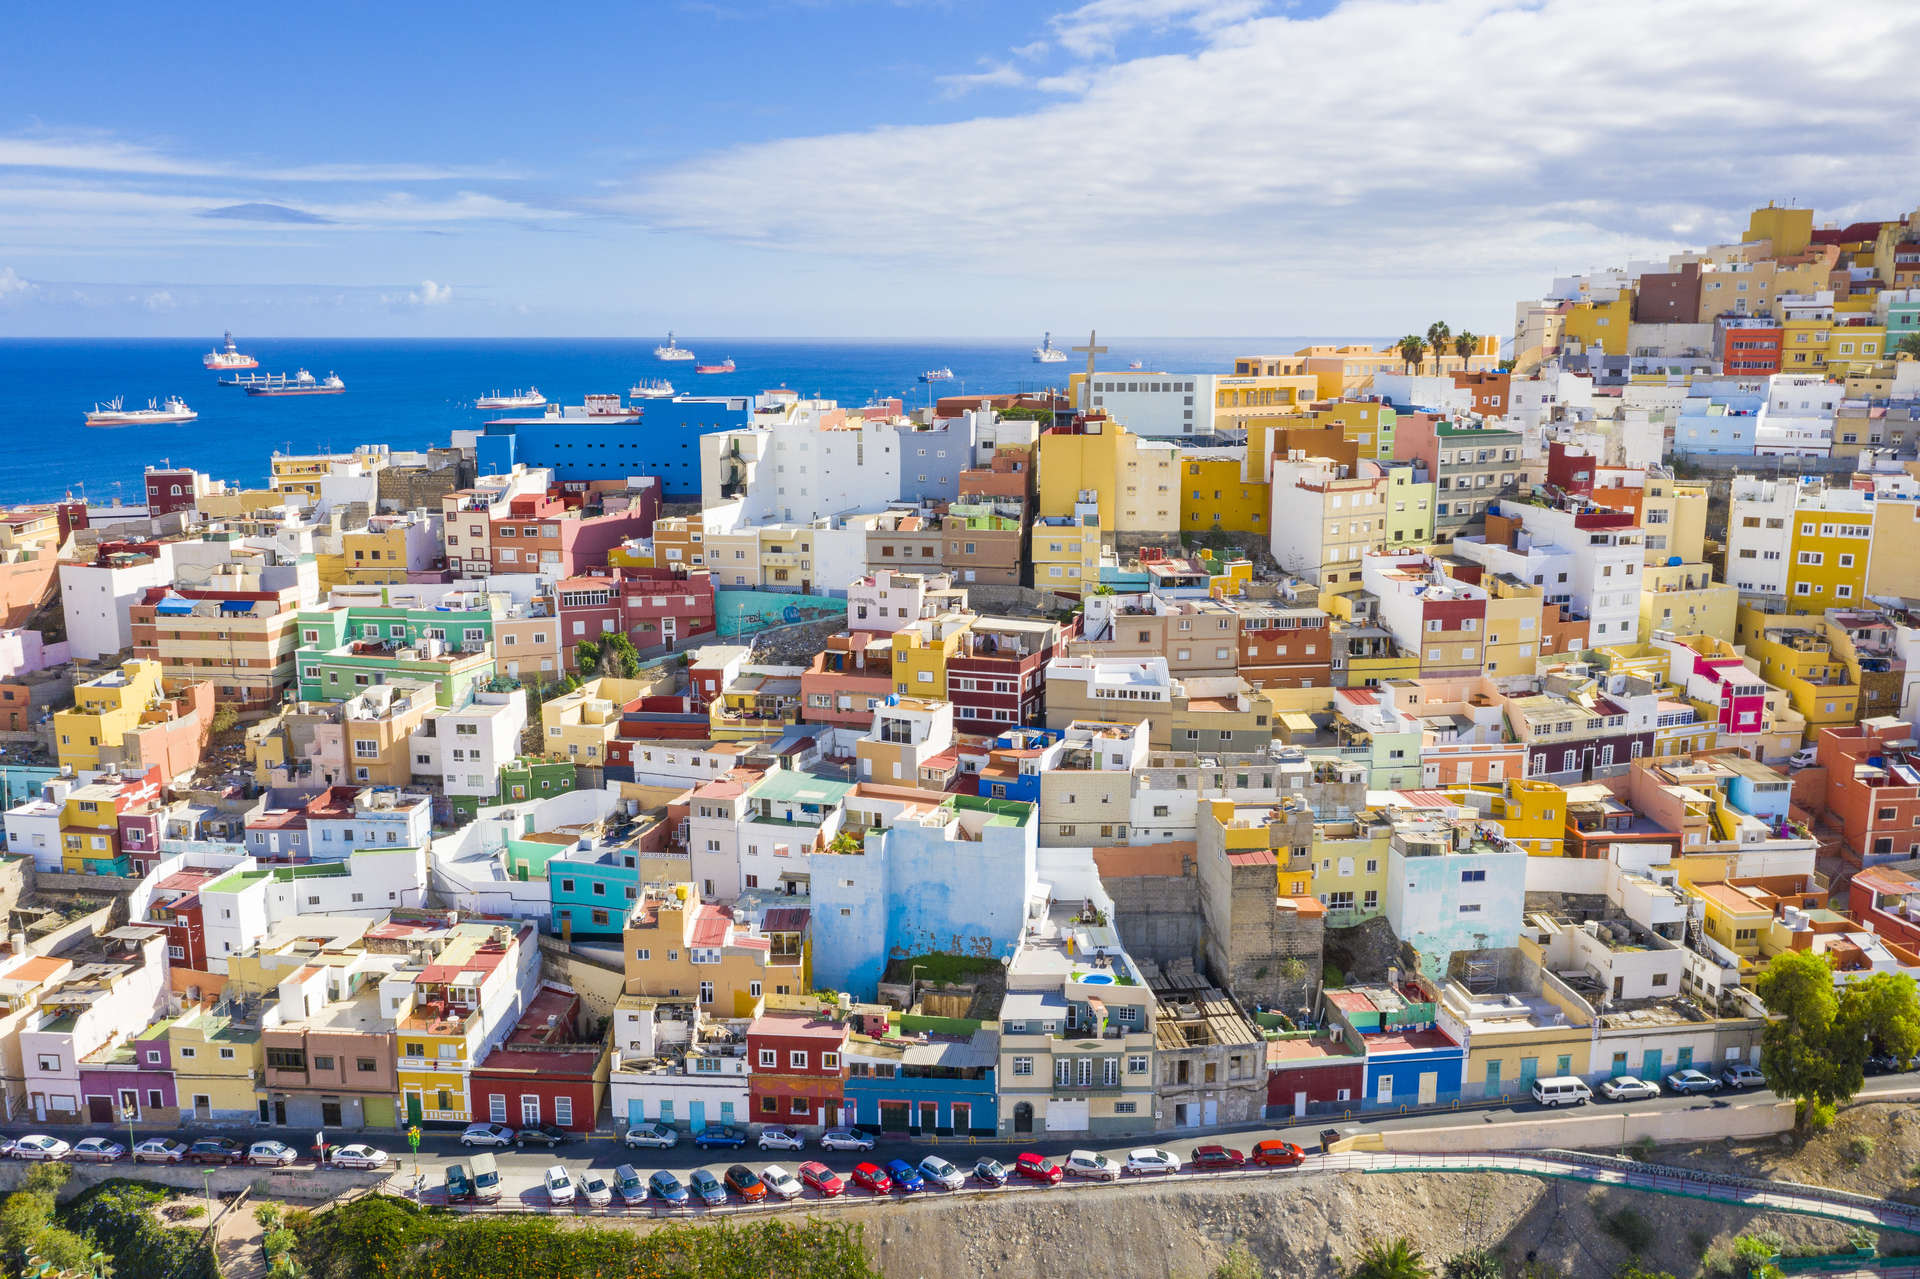 Colourful houses in Gran Canaria